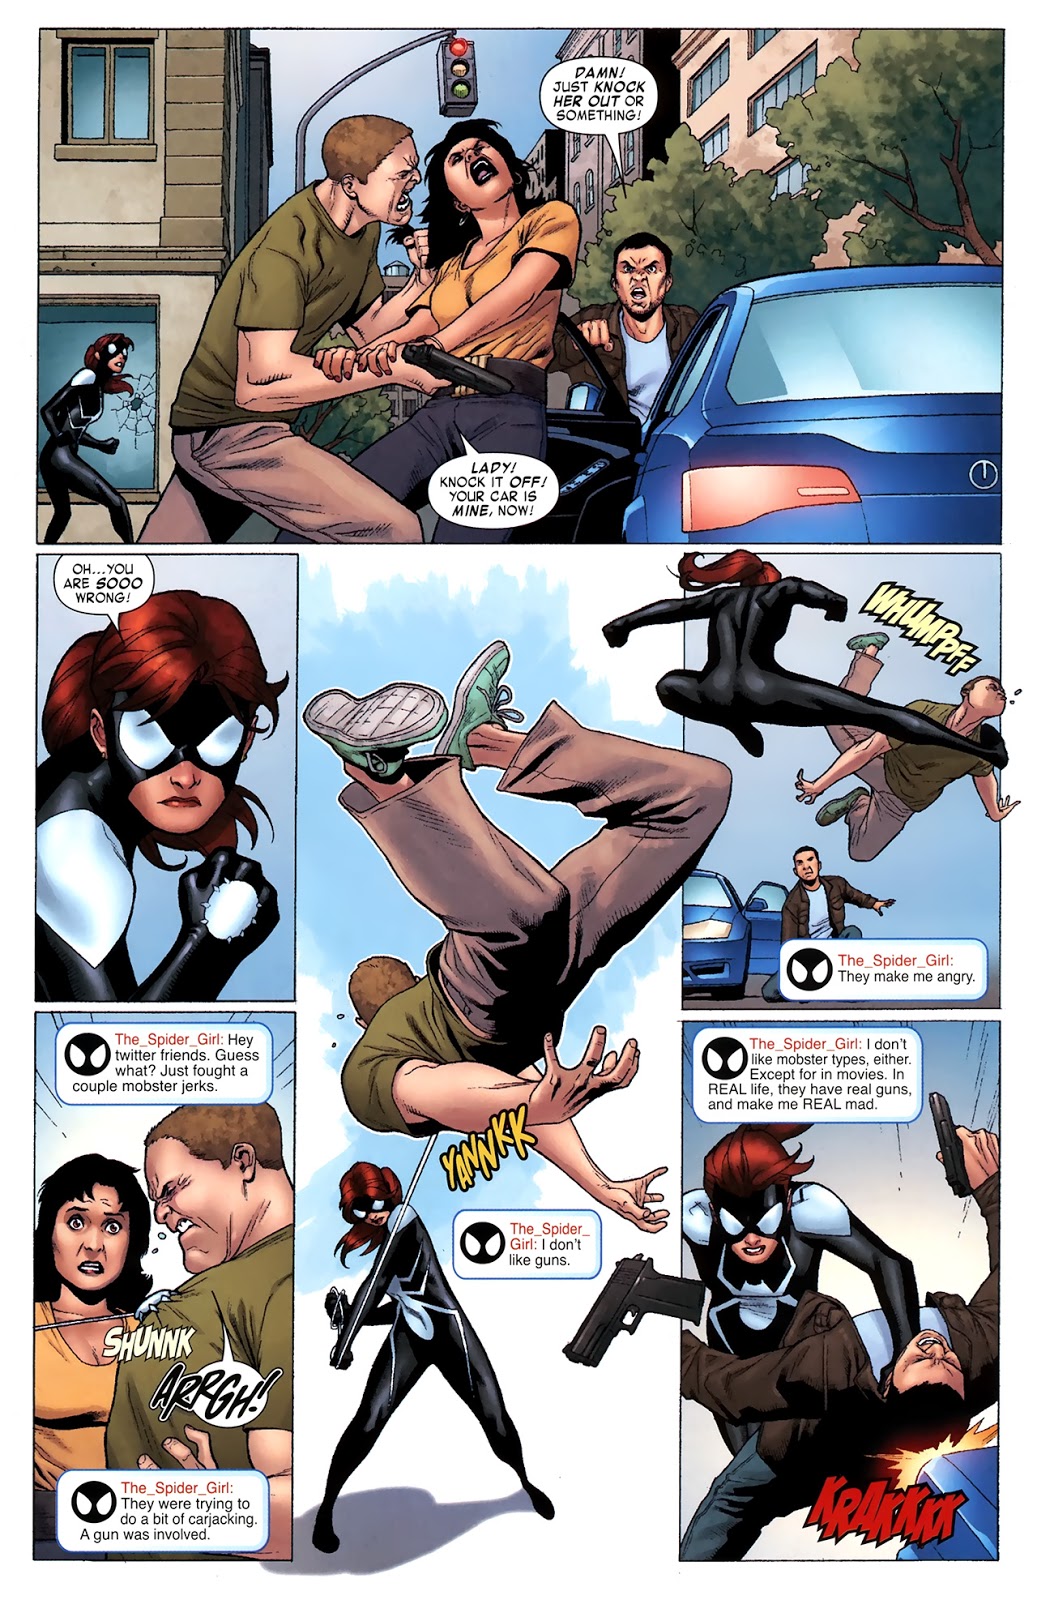 Spider-Girl Family Values review